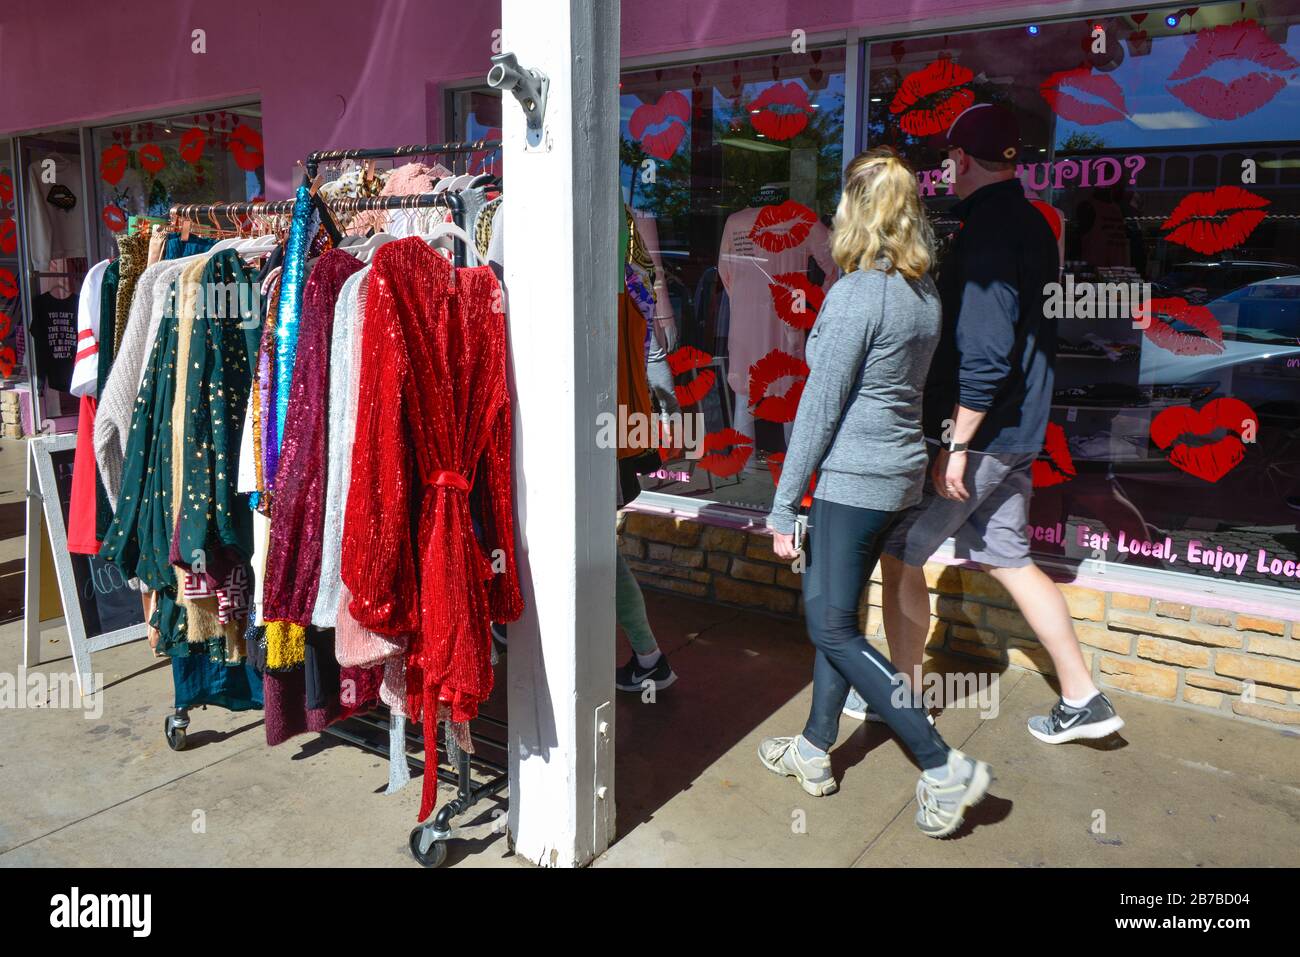 People wearing athletic clothing walking on sidewalk in front of storefronts with sparkly dresses on rack outside in old town Scottsdale, AZ, USA Stock Photo